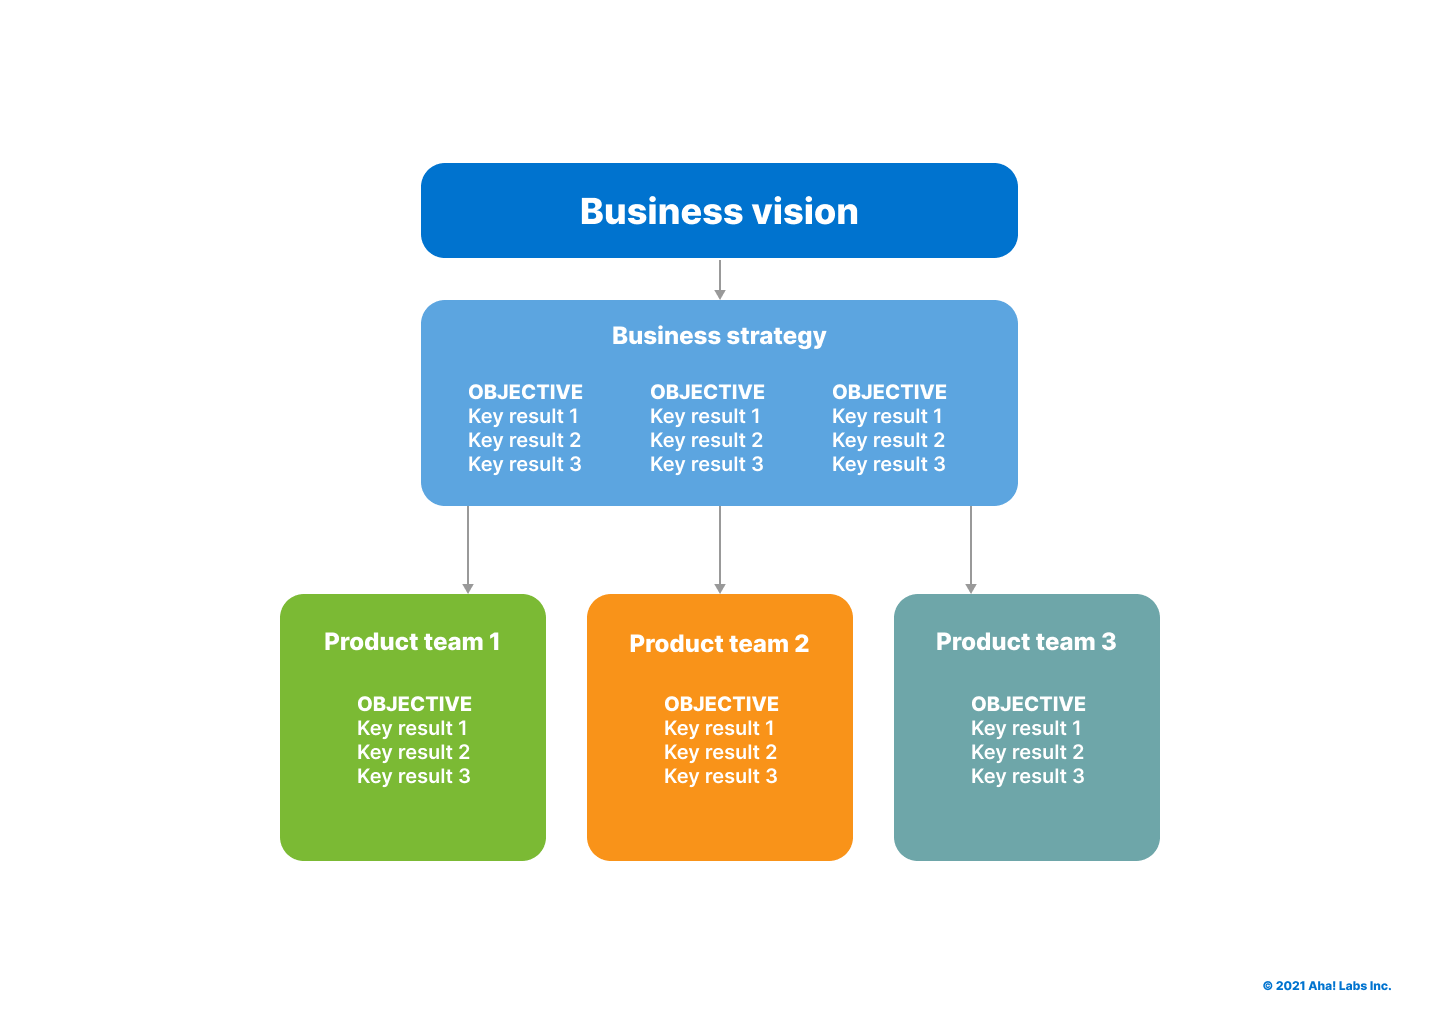 A diagram showing how OKRs cascade from Business vision to business strategy down to product team OKRs